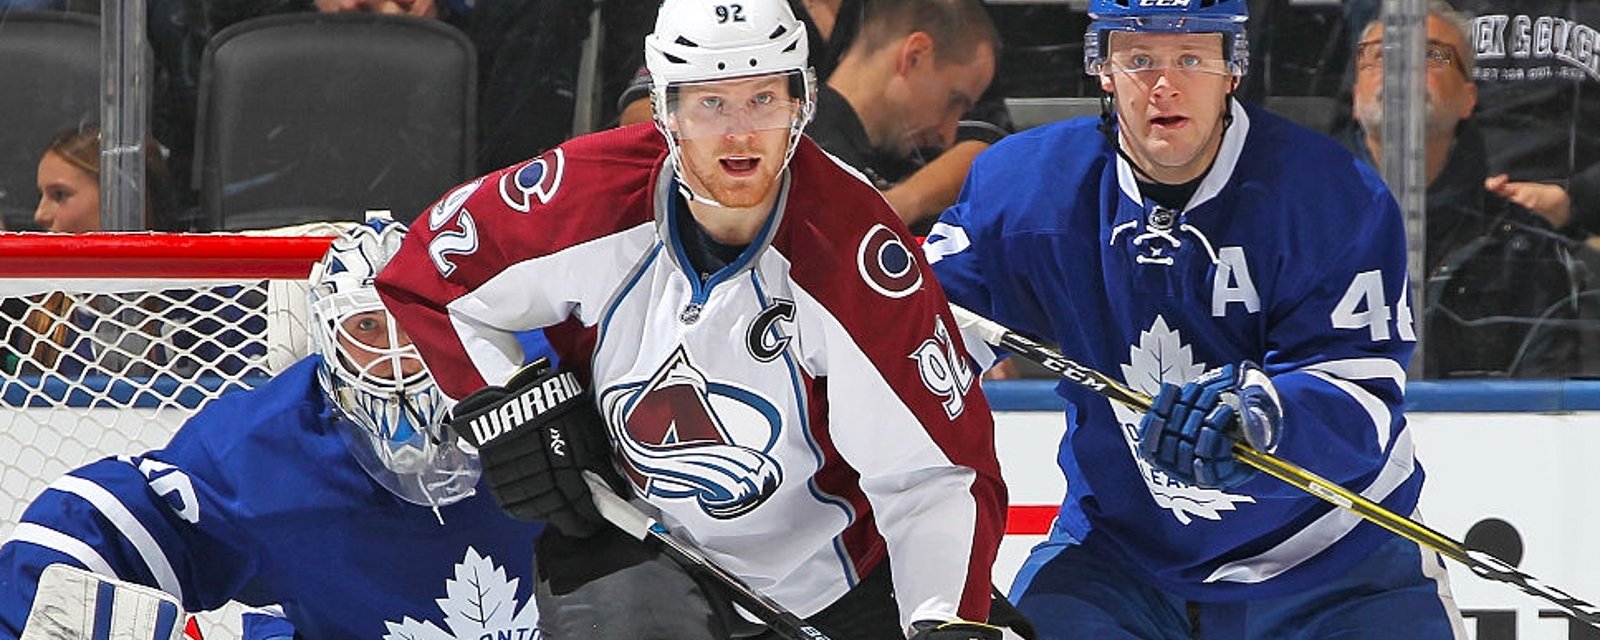 Leafs go after Landeskog, who remains far apart in contract talks with Avs